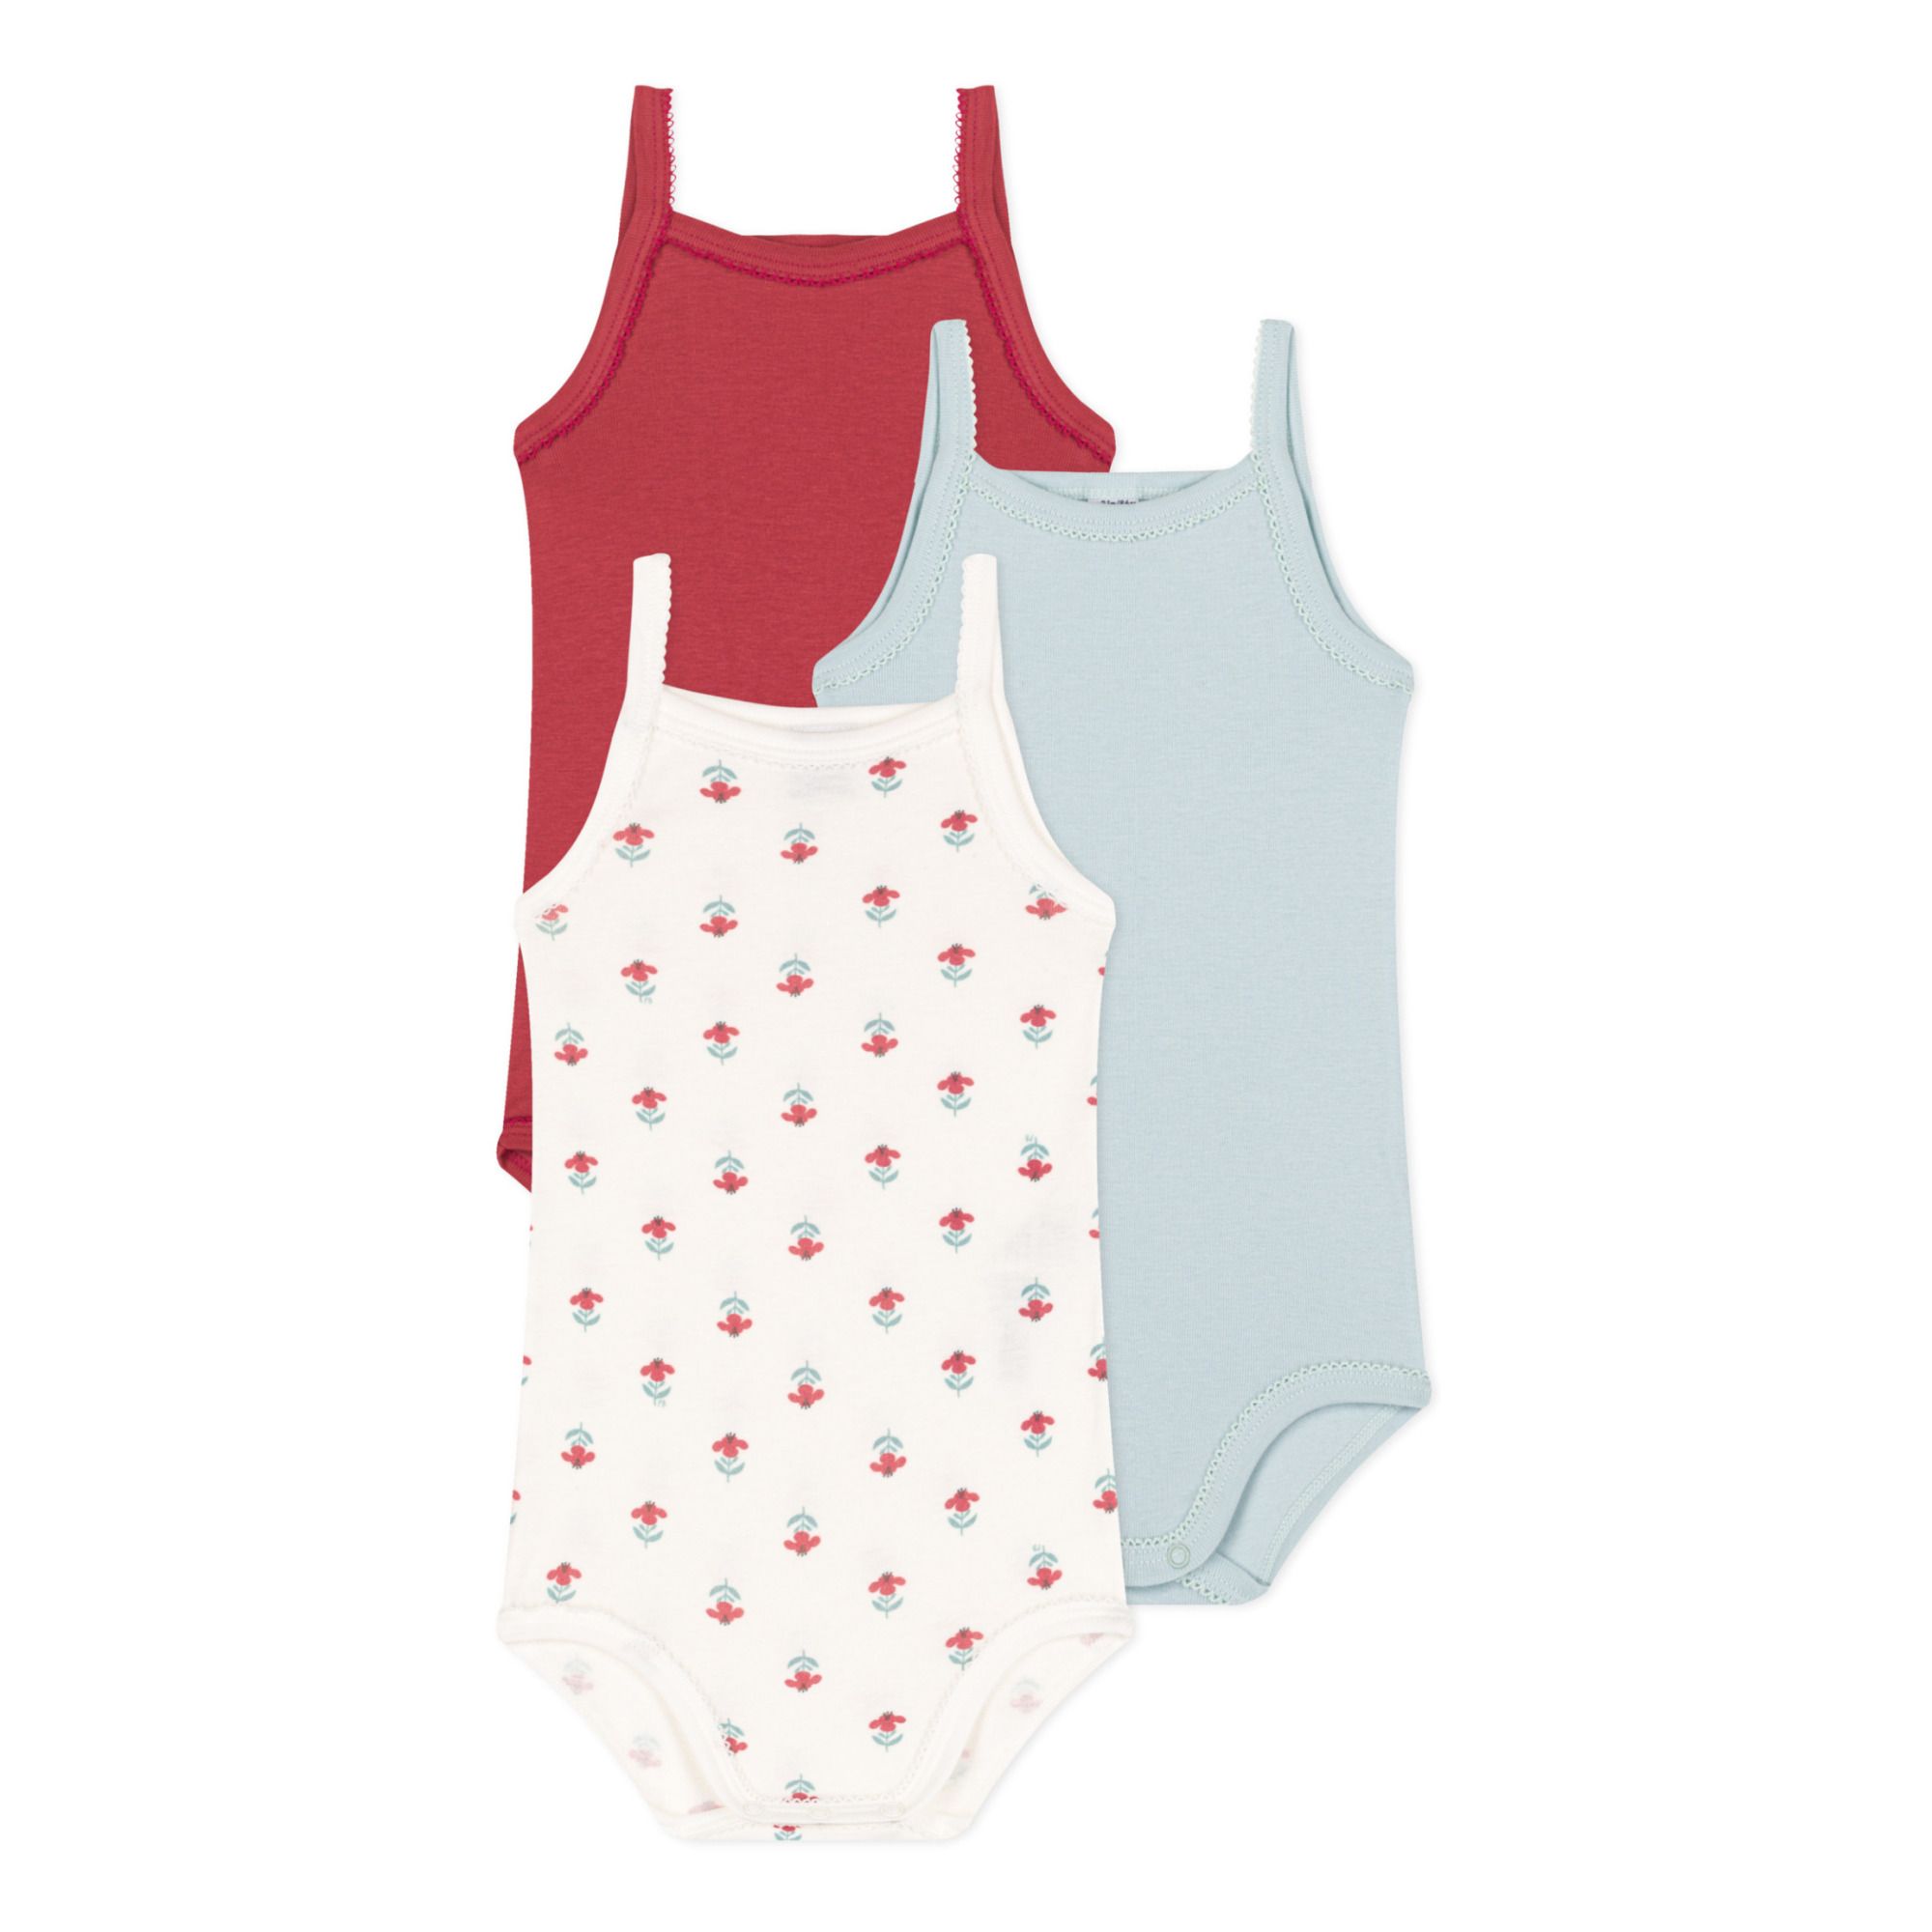 Petit Bateau - Ribbed Strappy Bodysuit - Set of 3 - Red